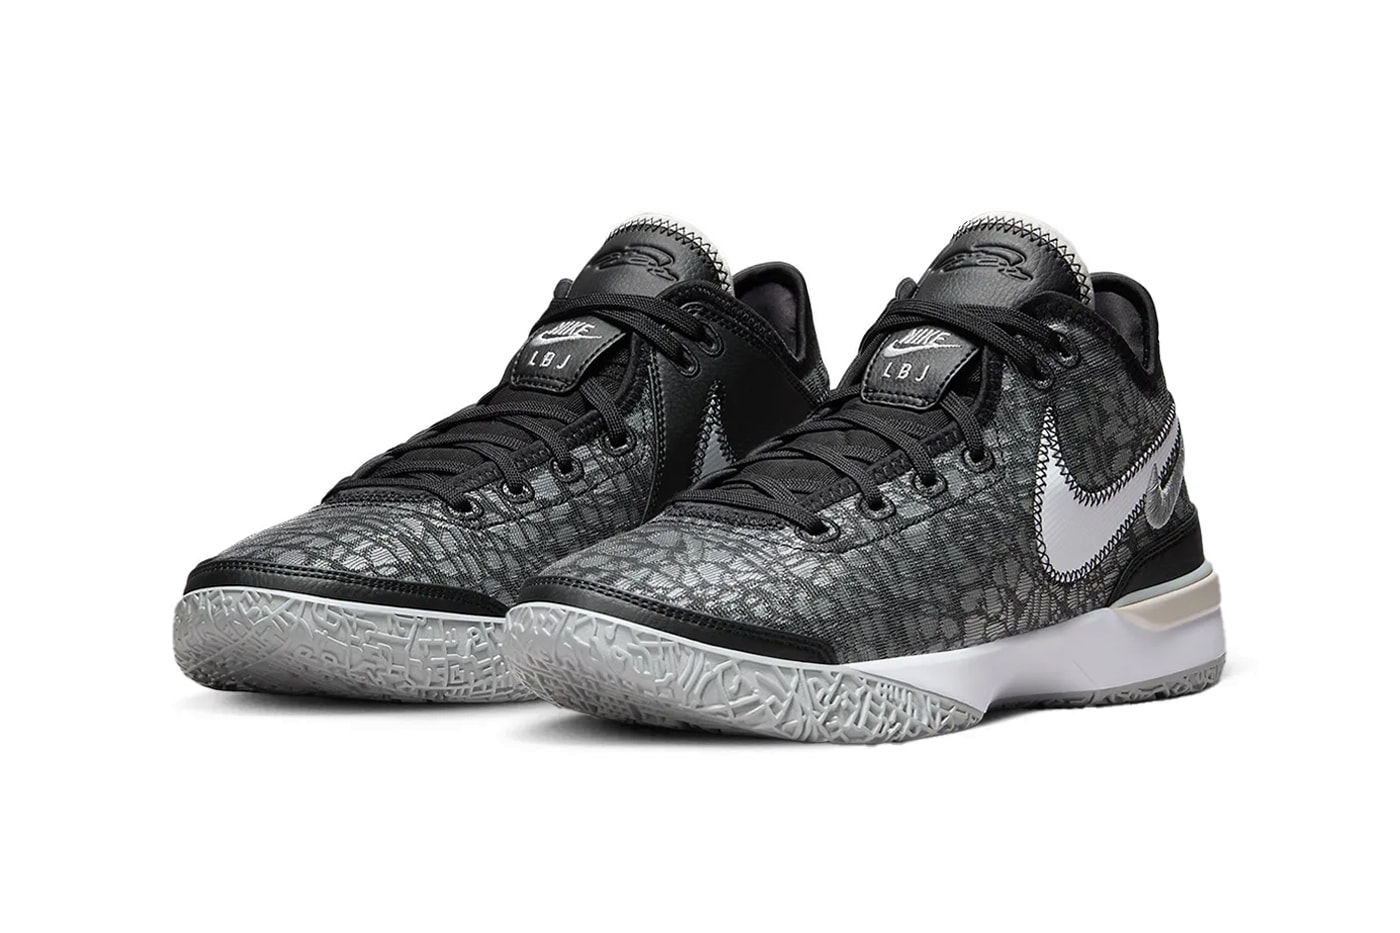 Nike Zoom LeBron NXXT Gen Surfaces in Black and Grey DR8784-005 lebron james nba basketball shoes court king james swoosh strive for greatness los angeles lakers classic shoes